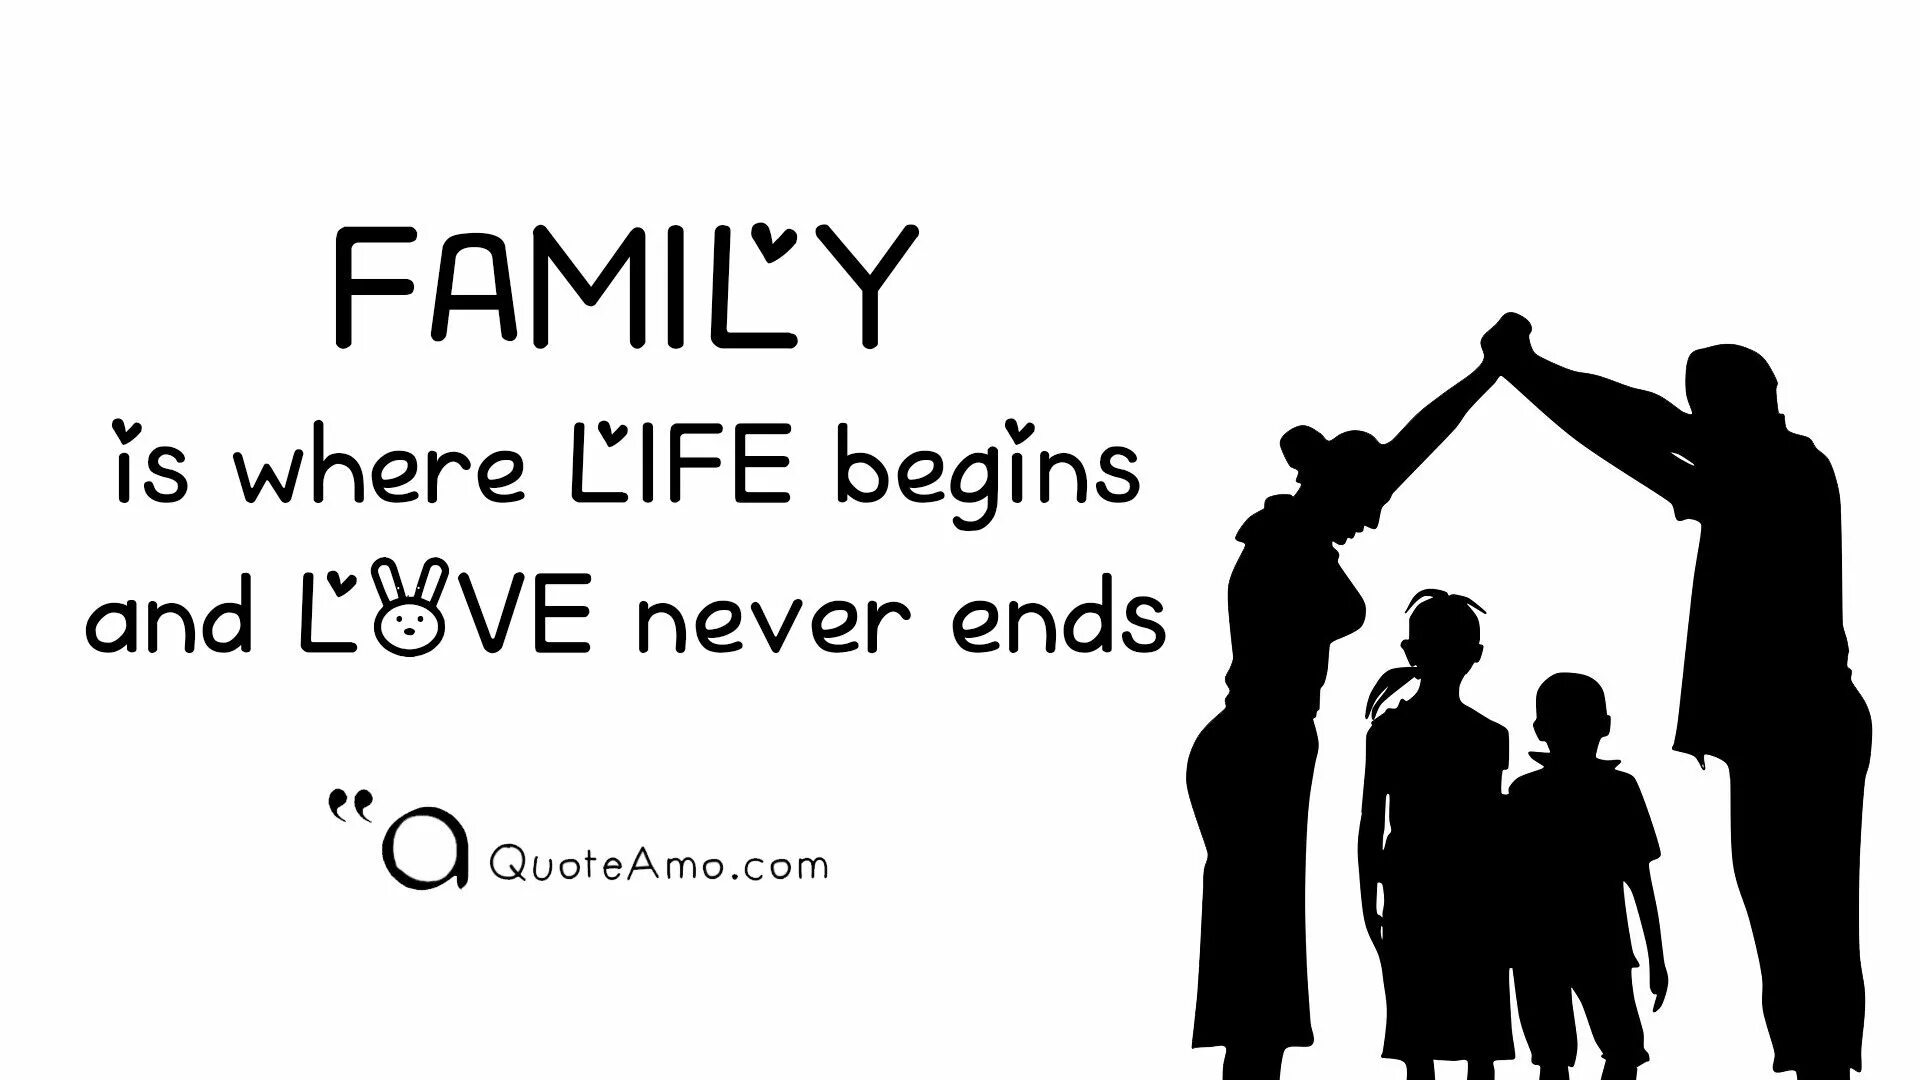 It s to my liking. Quotes about Family. Family цитаты. About Family цитата. Цитаты про семью на английском.